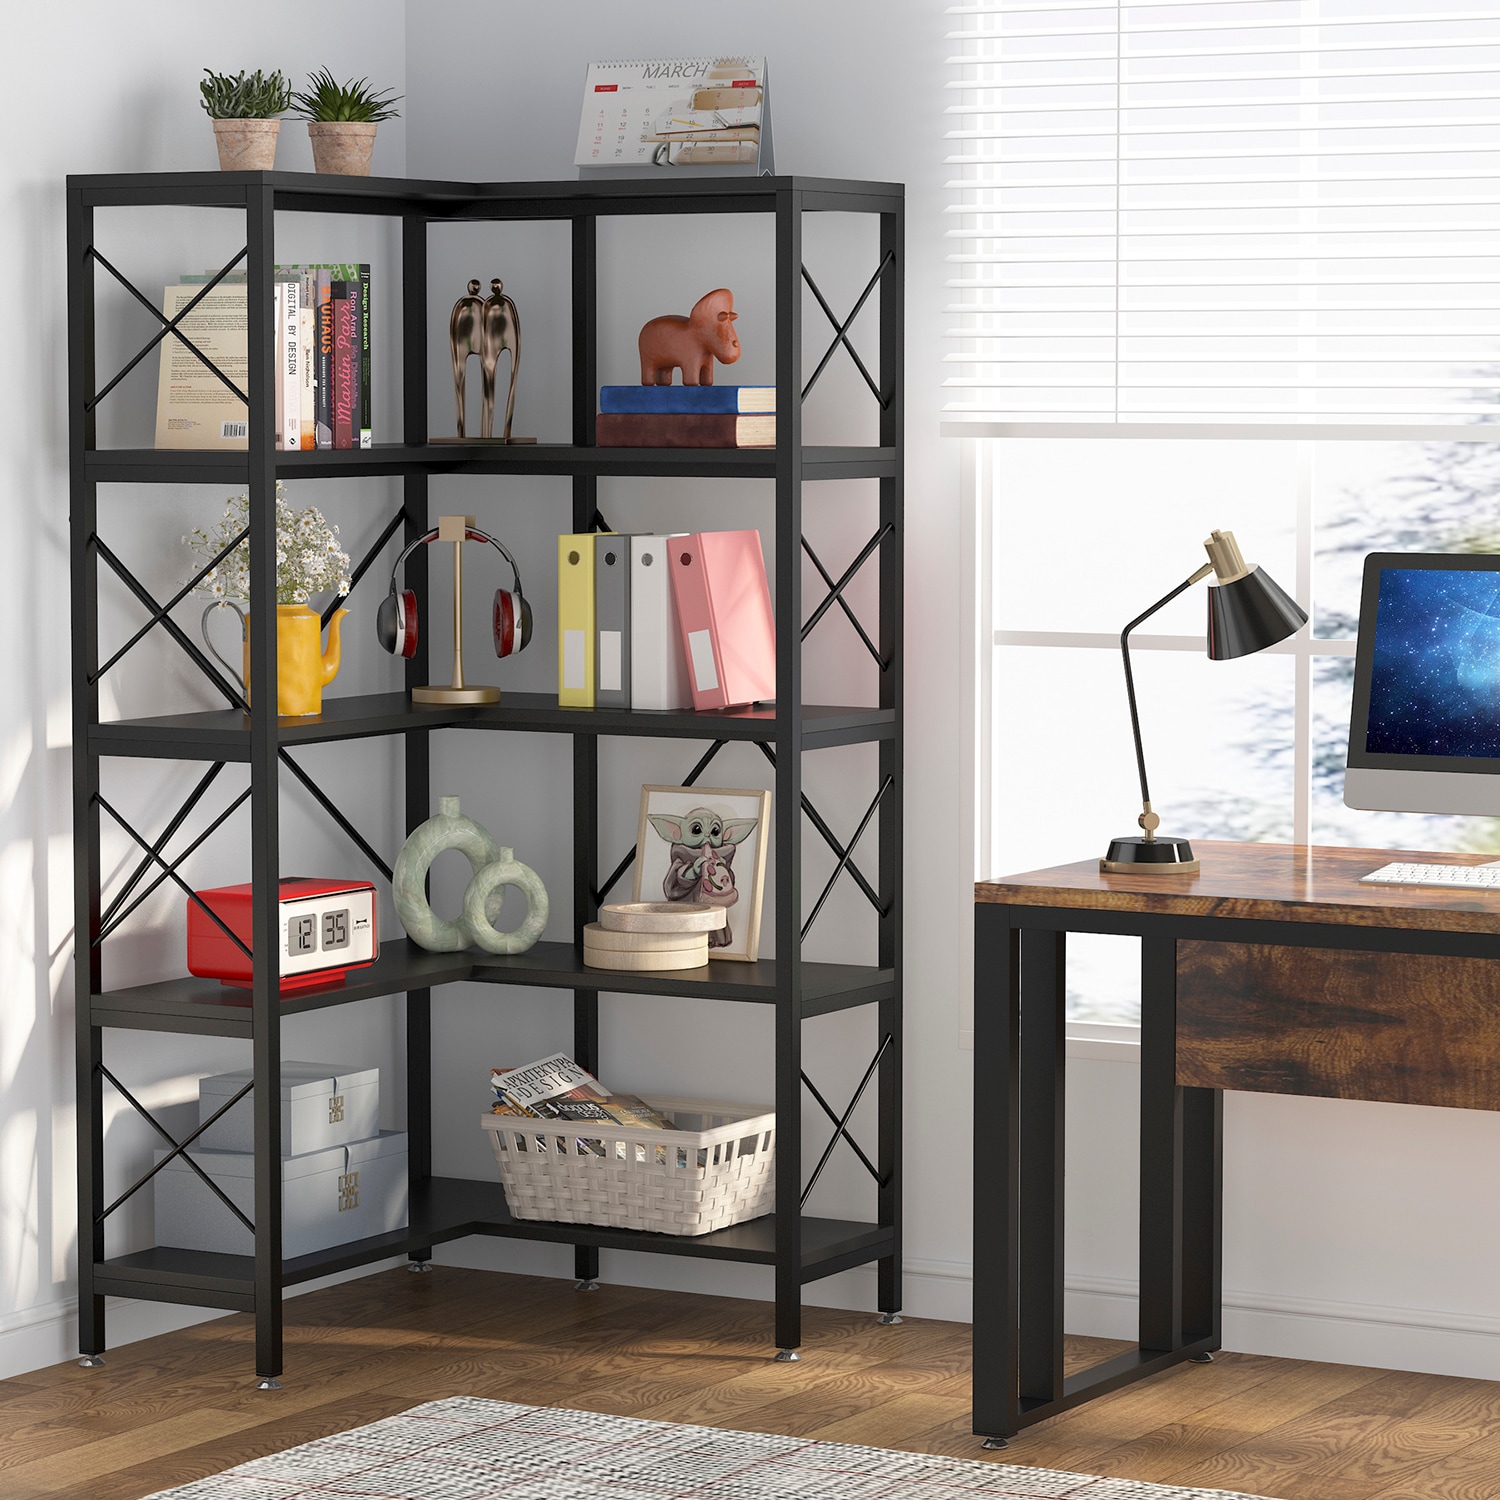 Shop Book Corner Metal with great discounts and prices online